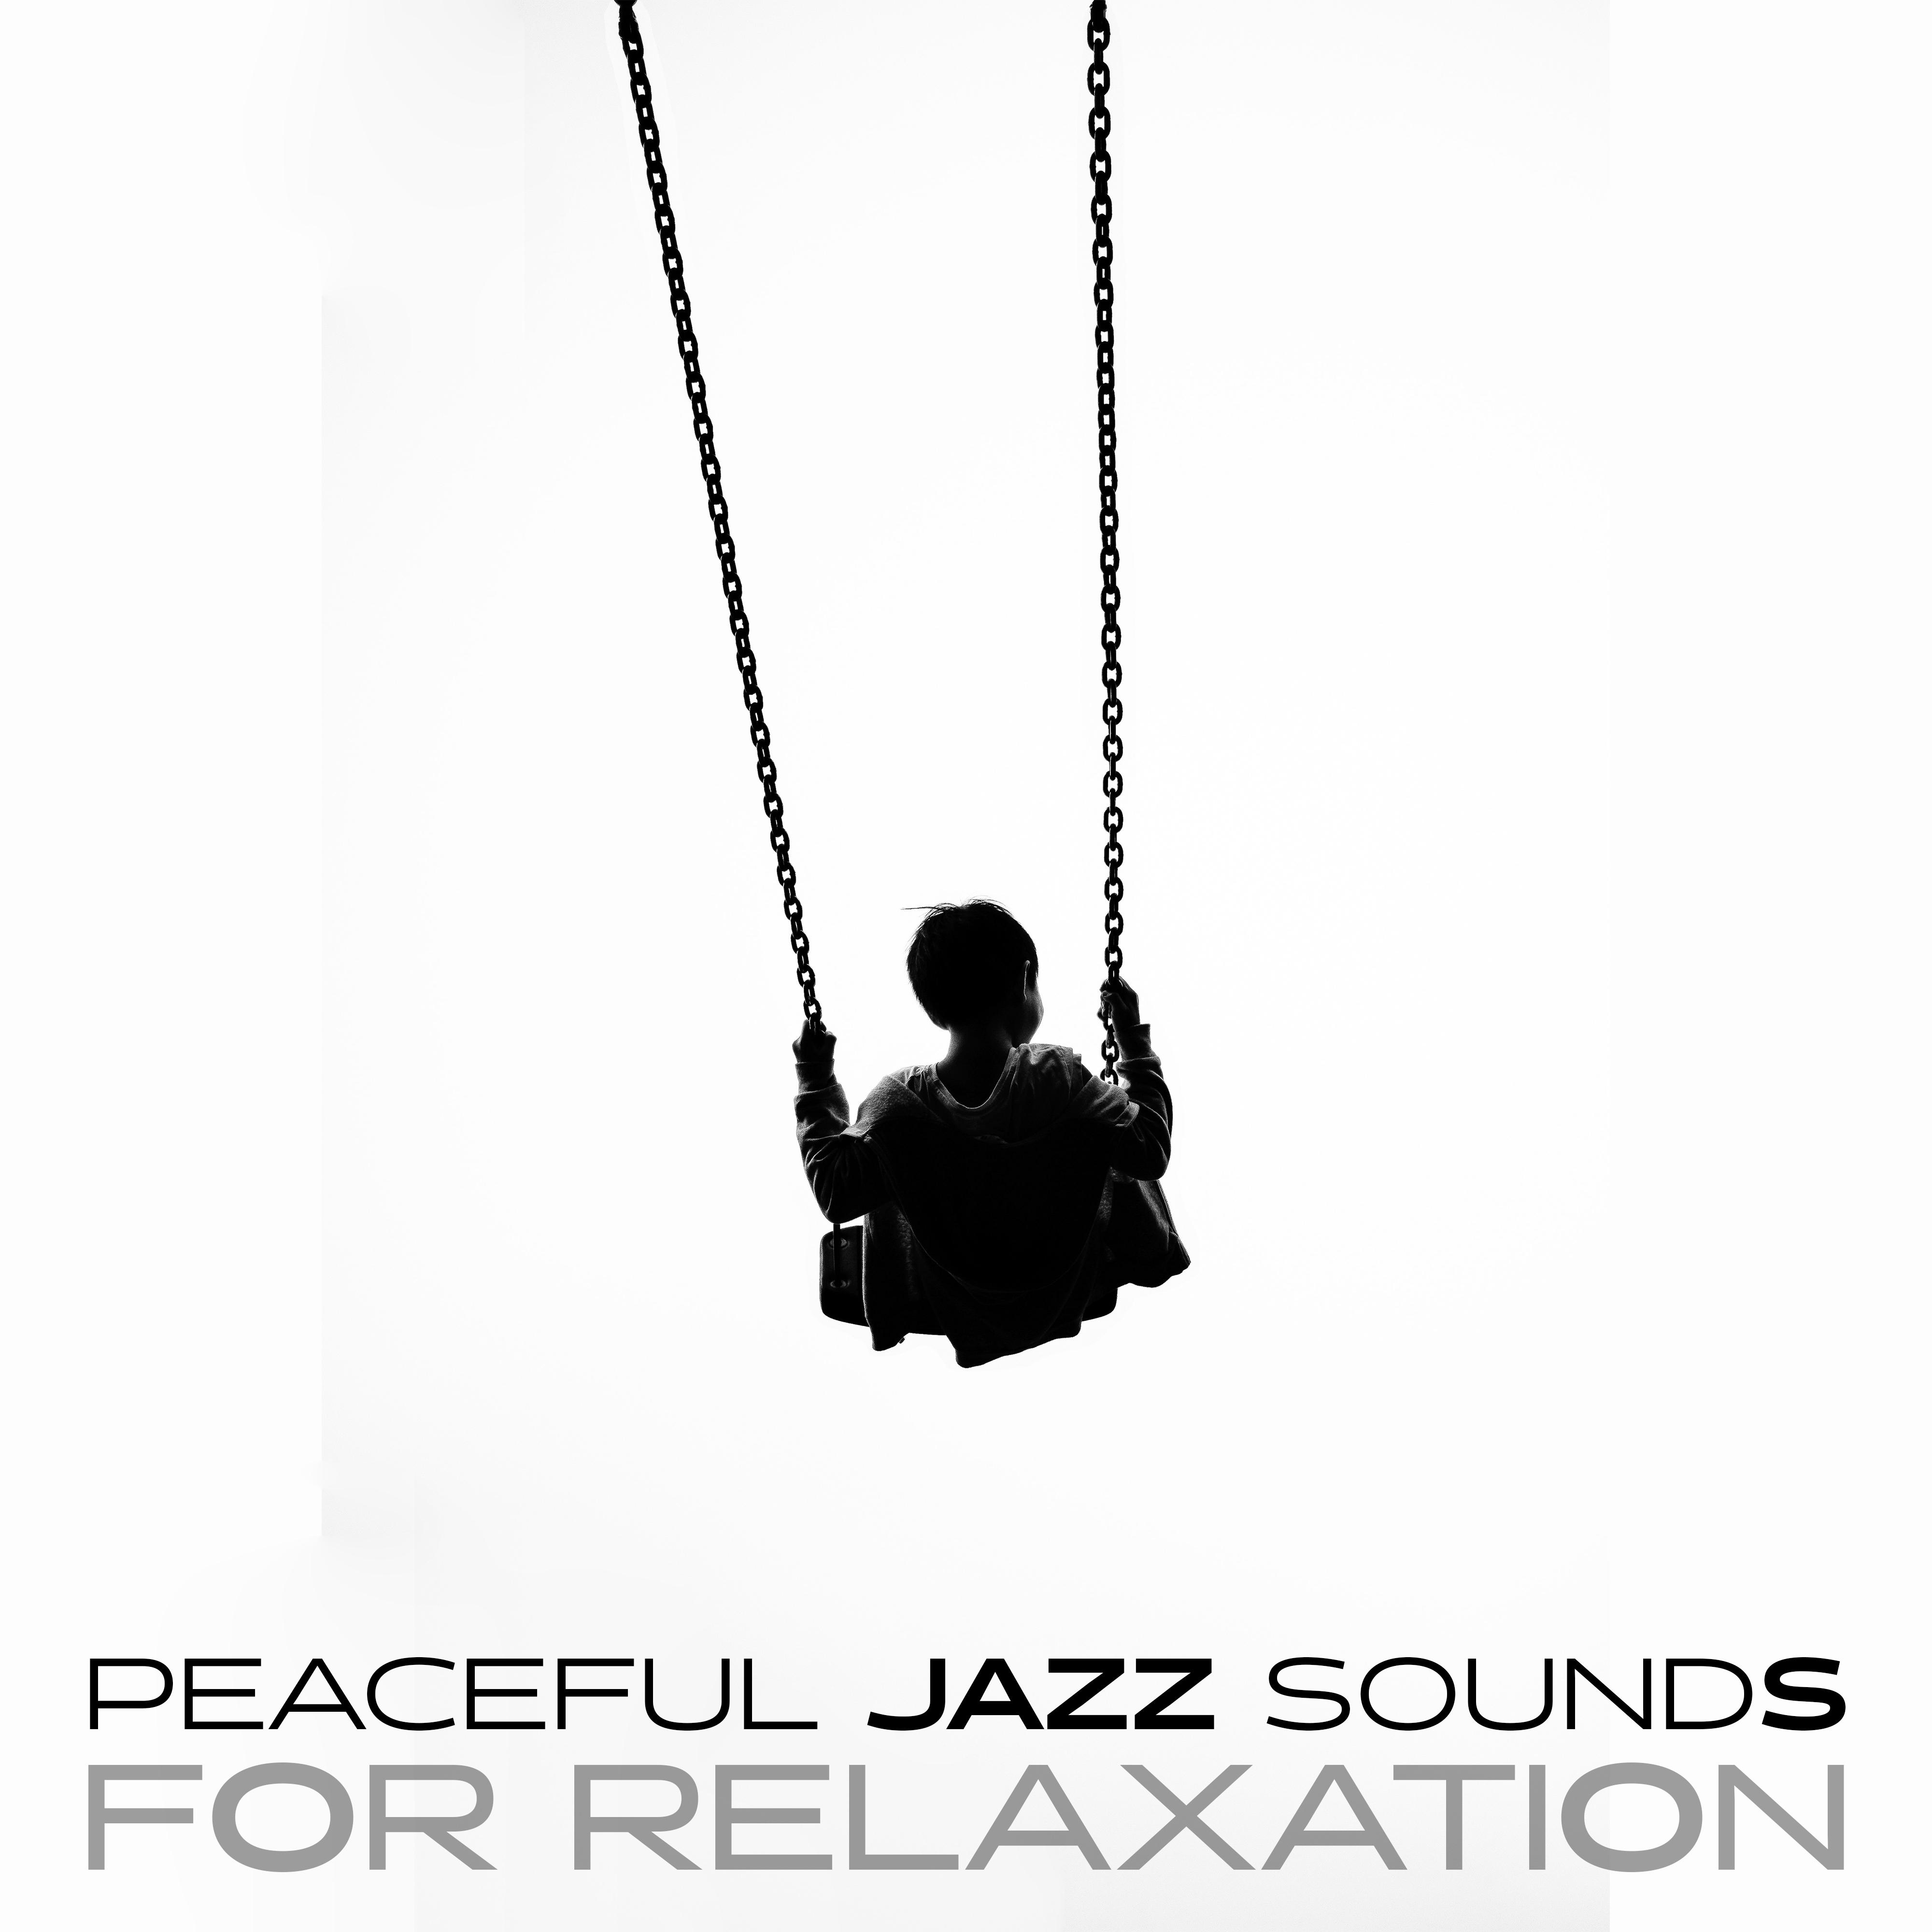 Peaceful Jazz Sounds for Relaxation